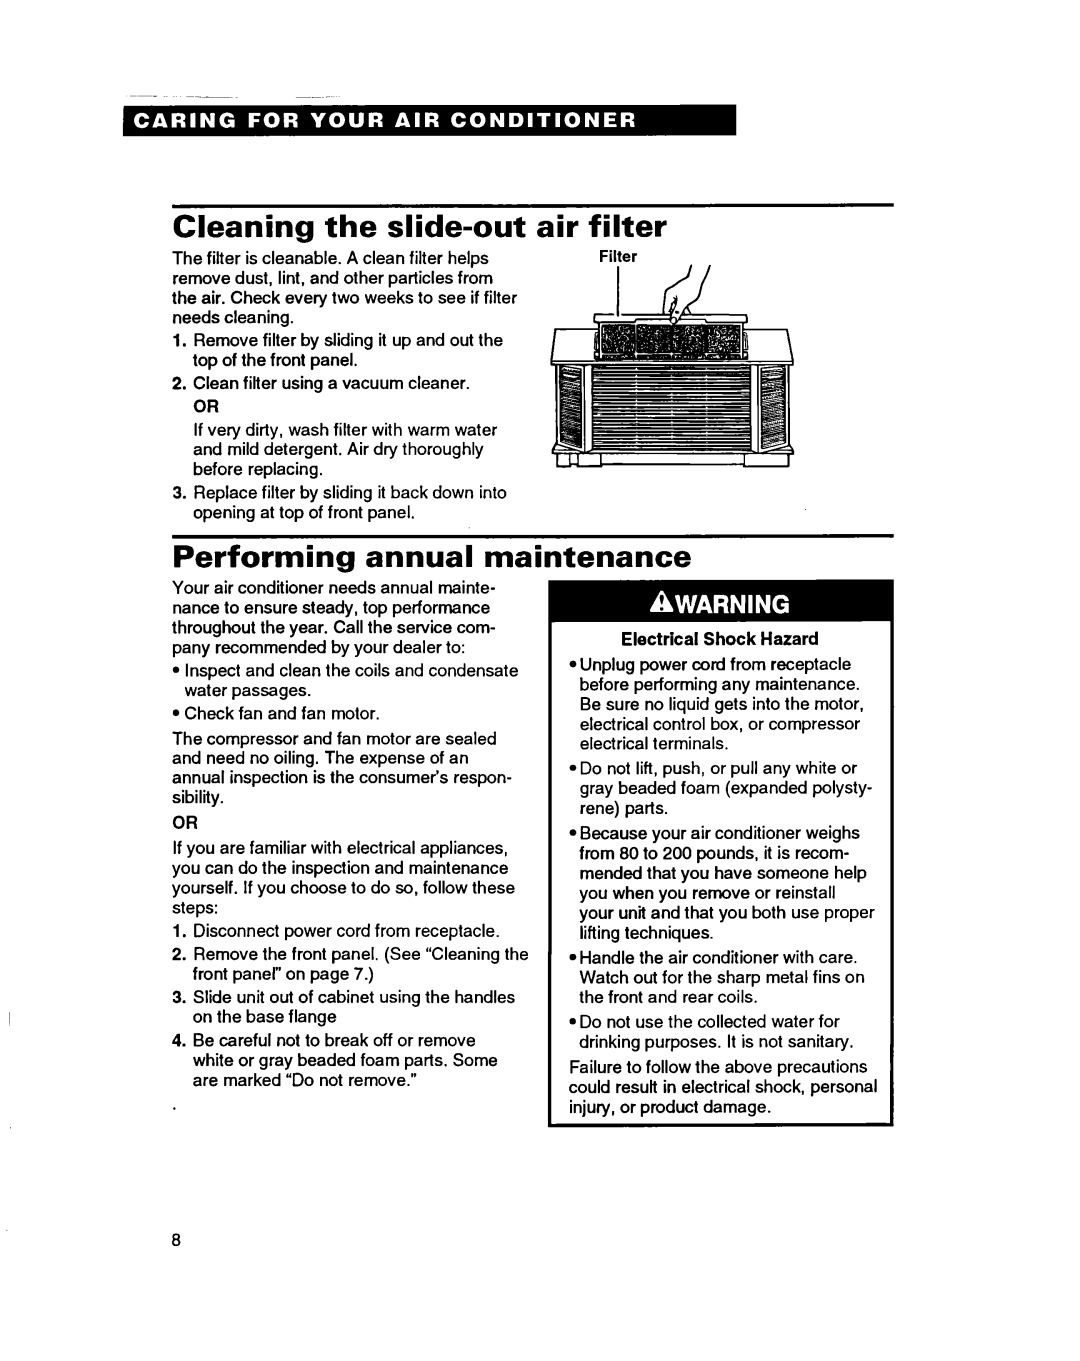 Whirlpool ACH082XD0 warranty Cleaning the slide-out, air filter, Performing annual maintenance, Electrical Shock Hazard 